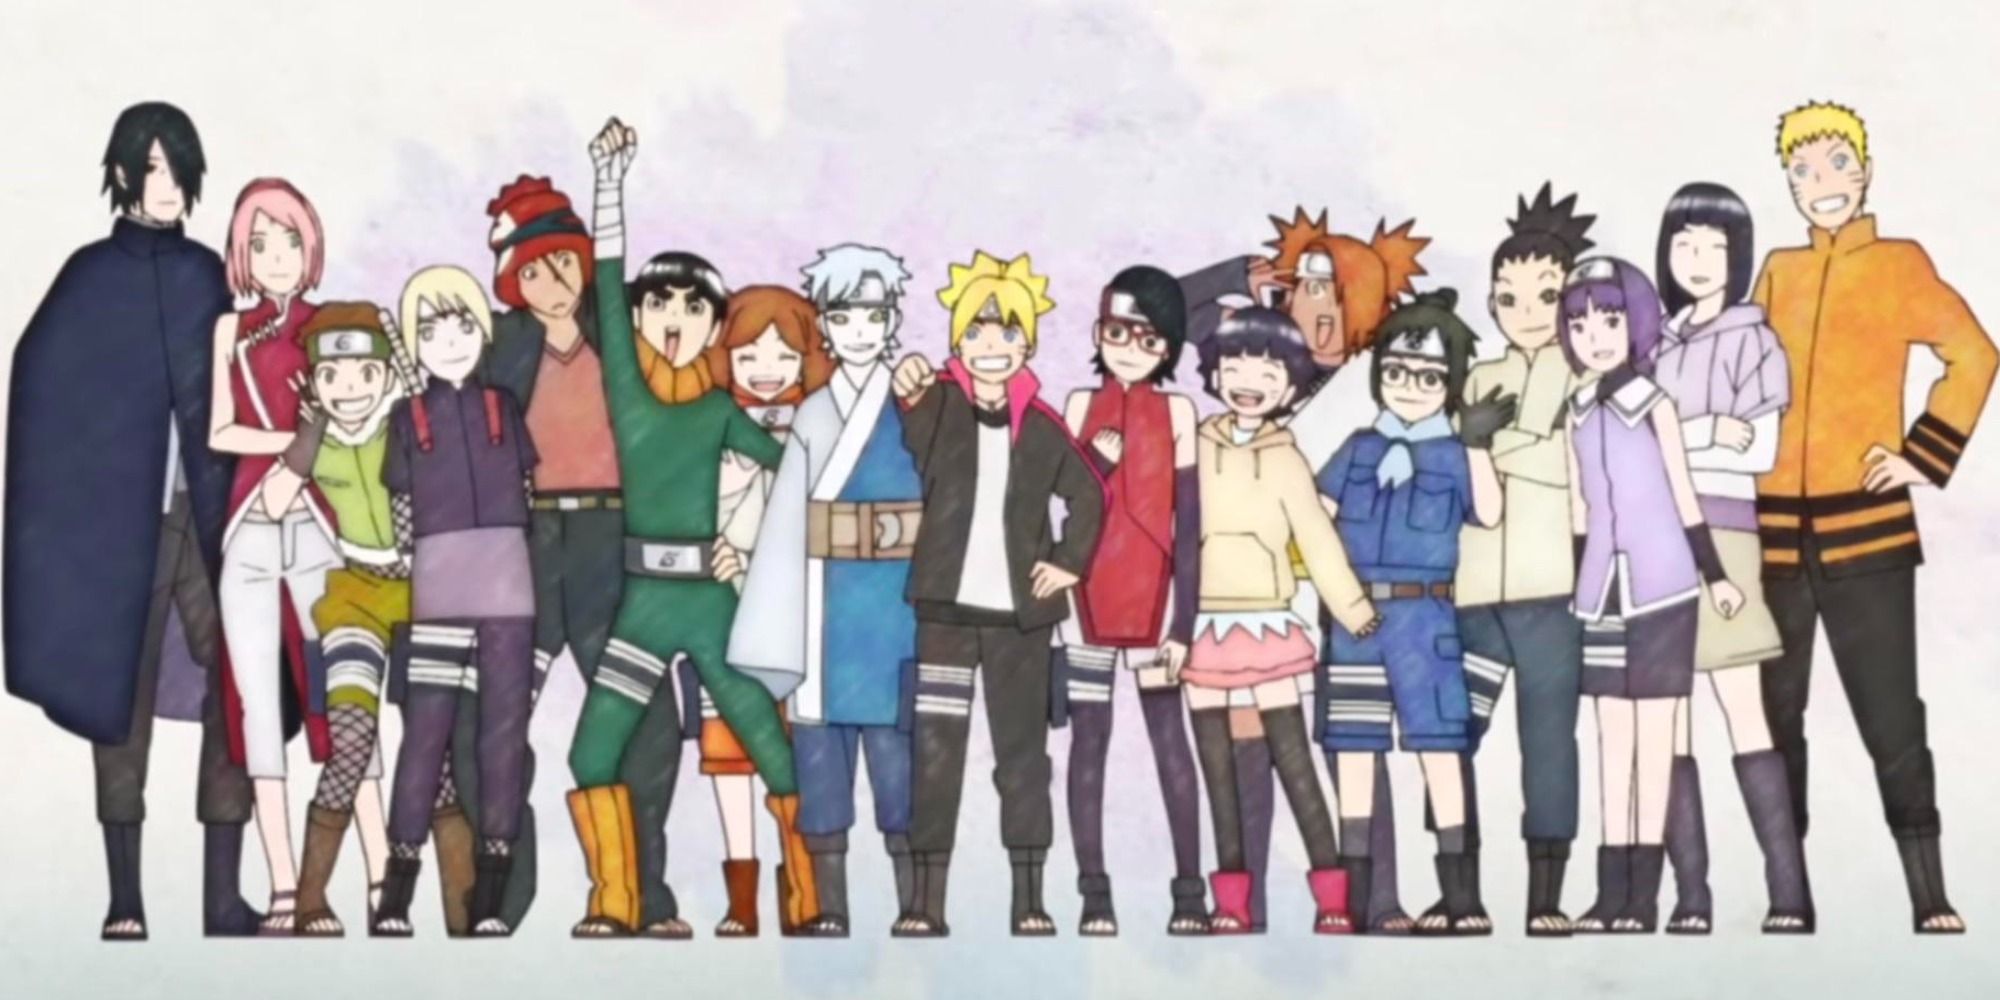 Image of some of the main cast of characters in Boruto: Naruto Next Generations